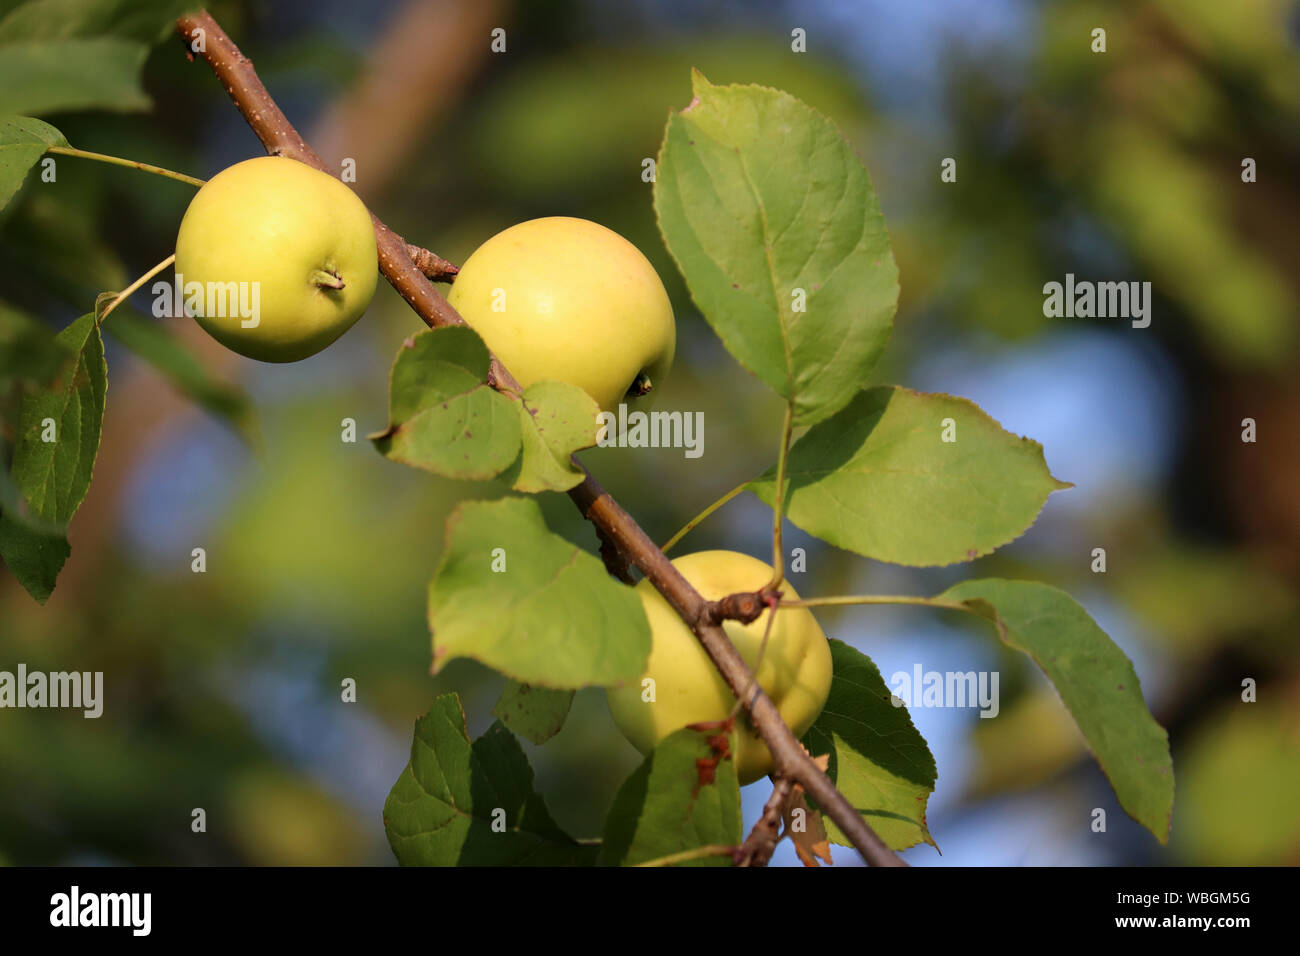 Green apples on a tree in a summer garden, close up. Ripe apple fruits hanging on branch with leaves in a sunny day, rural scene Stock Photo